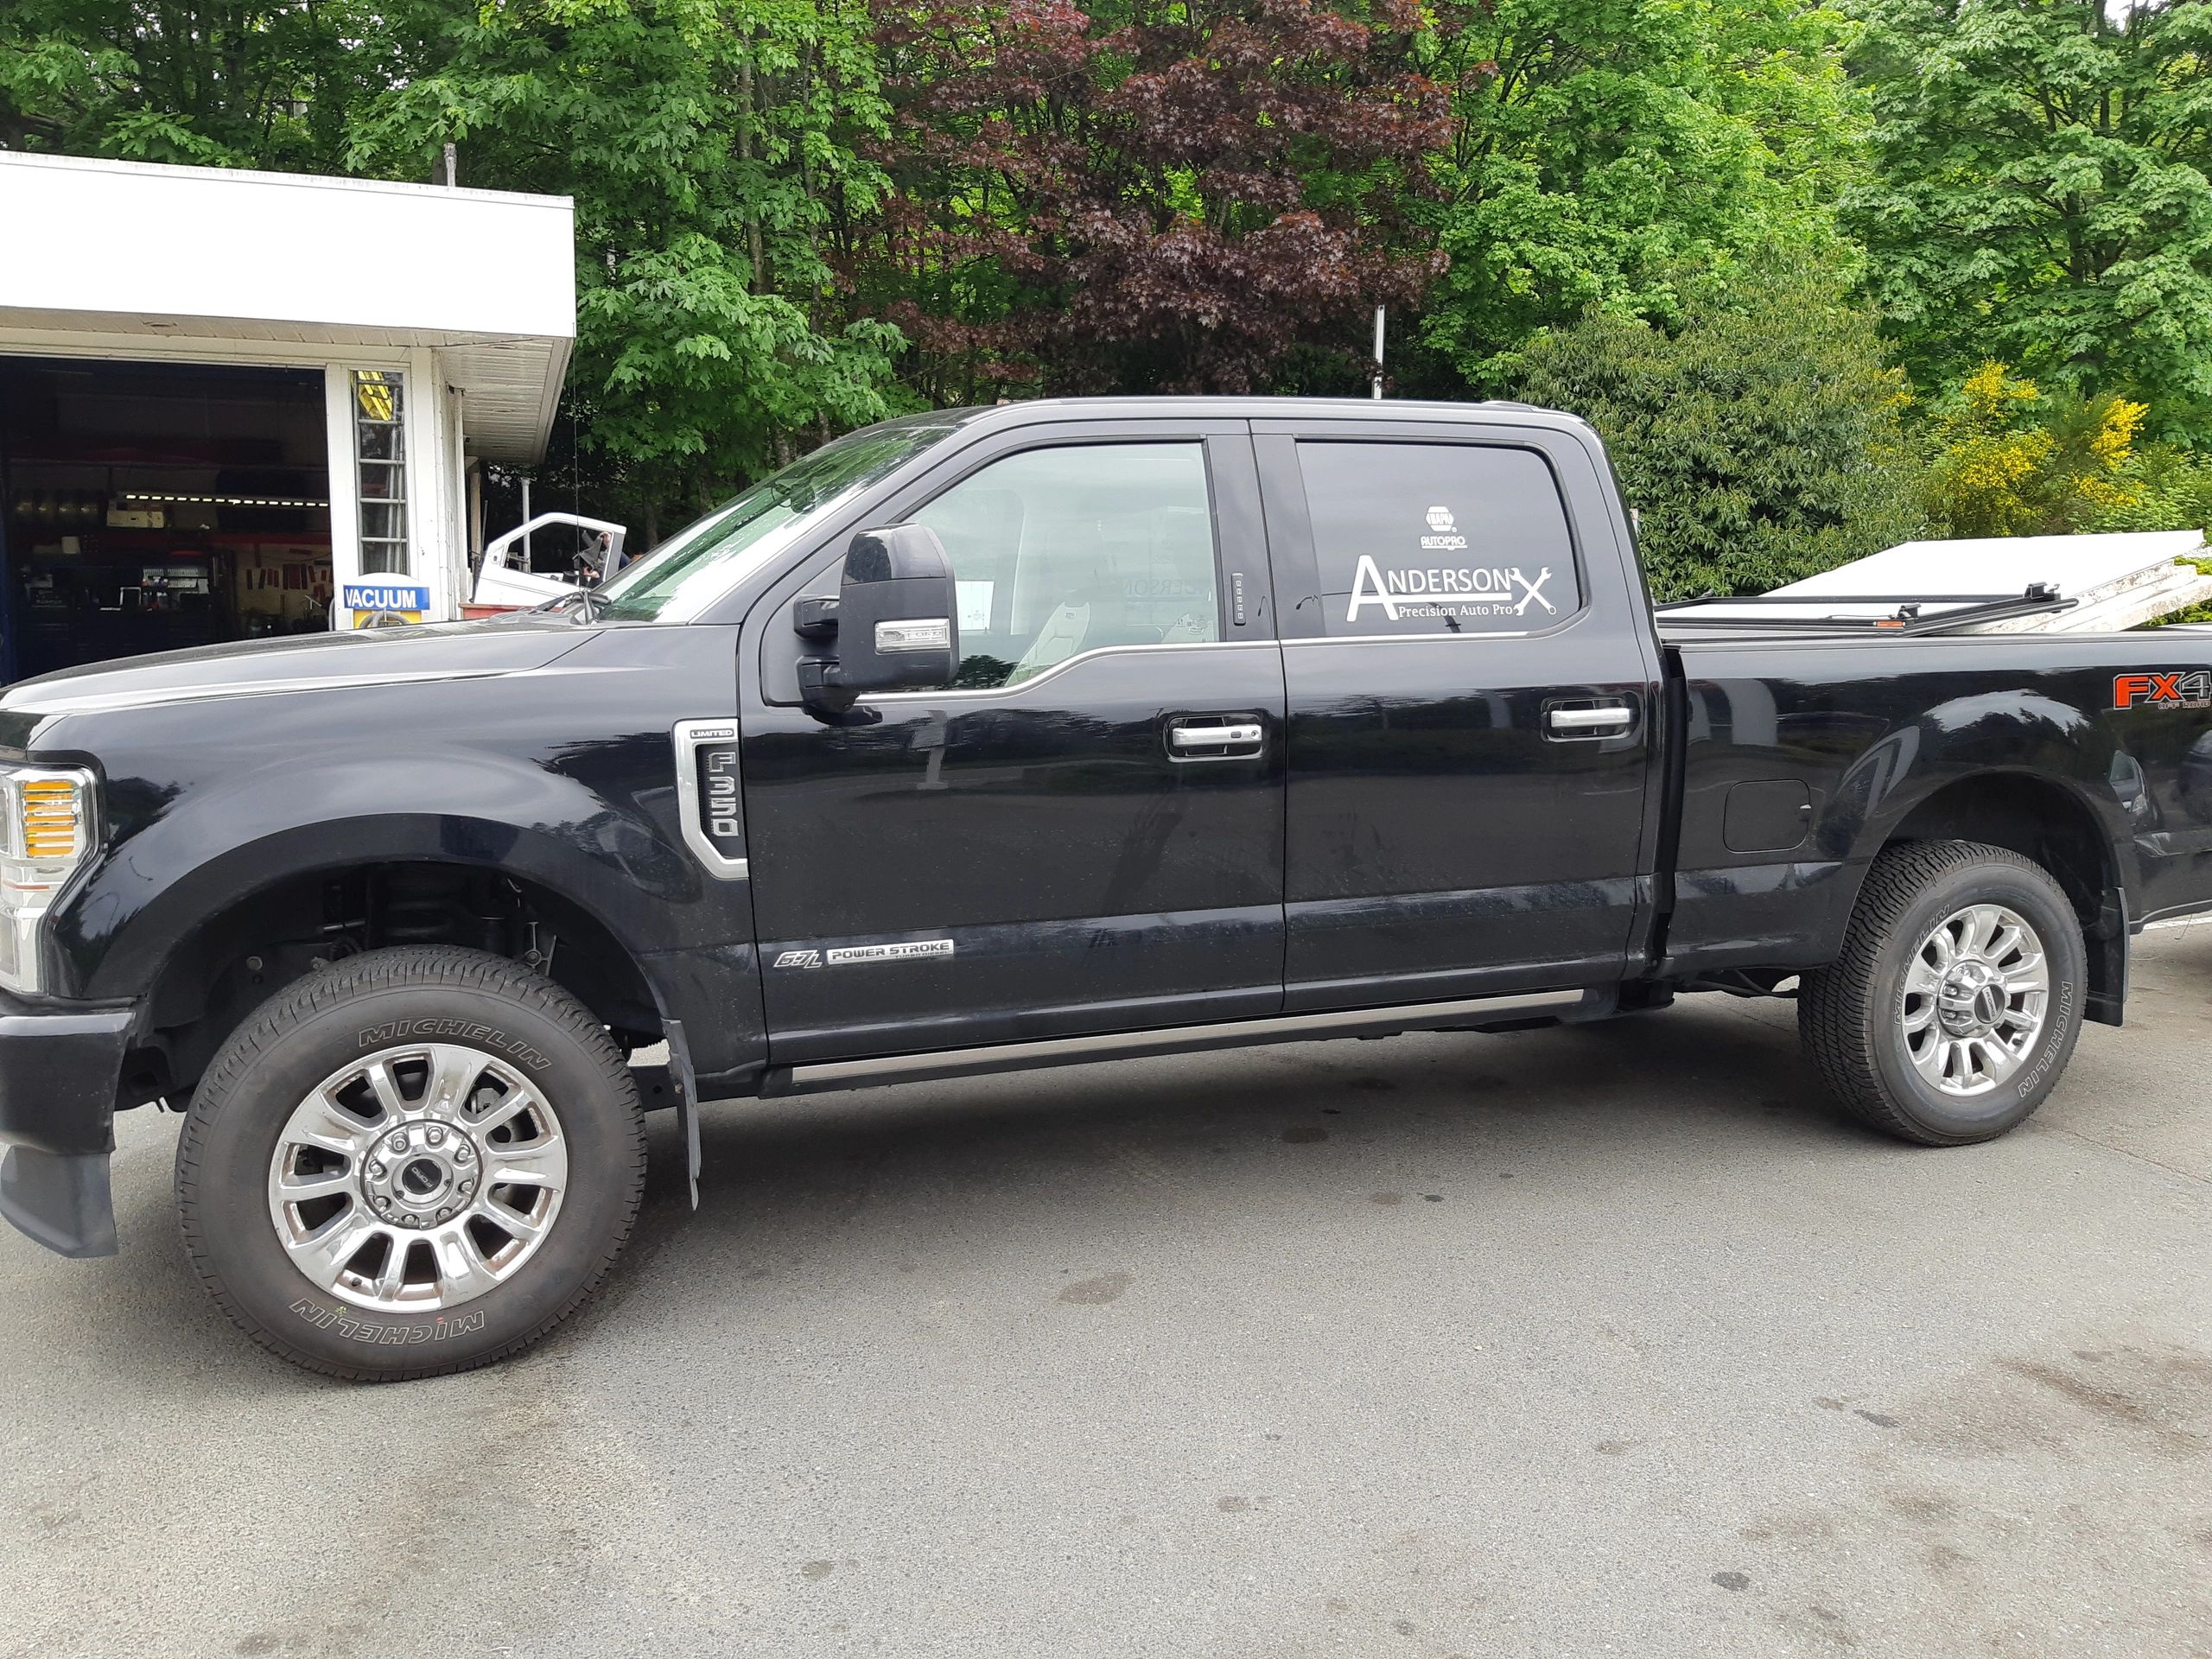 Fleet vehicle, truck servicing, work truck.  Repairs on all makes and models.